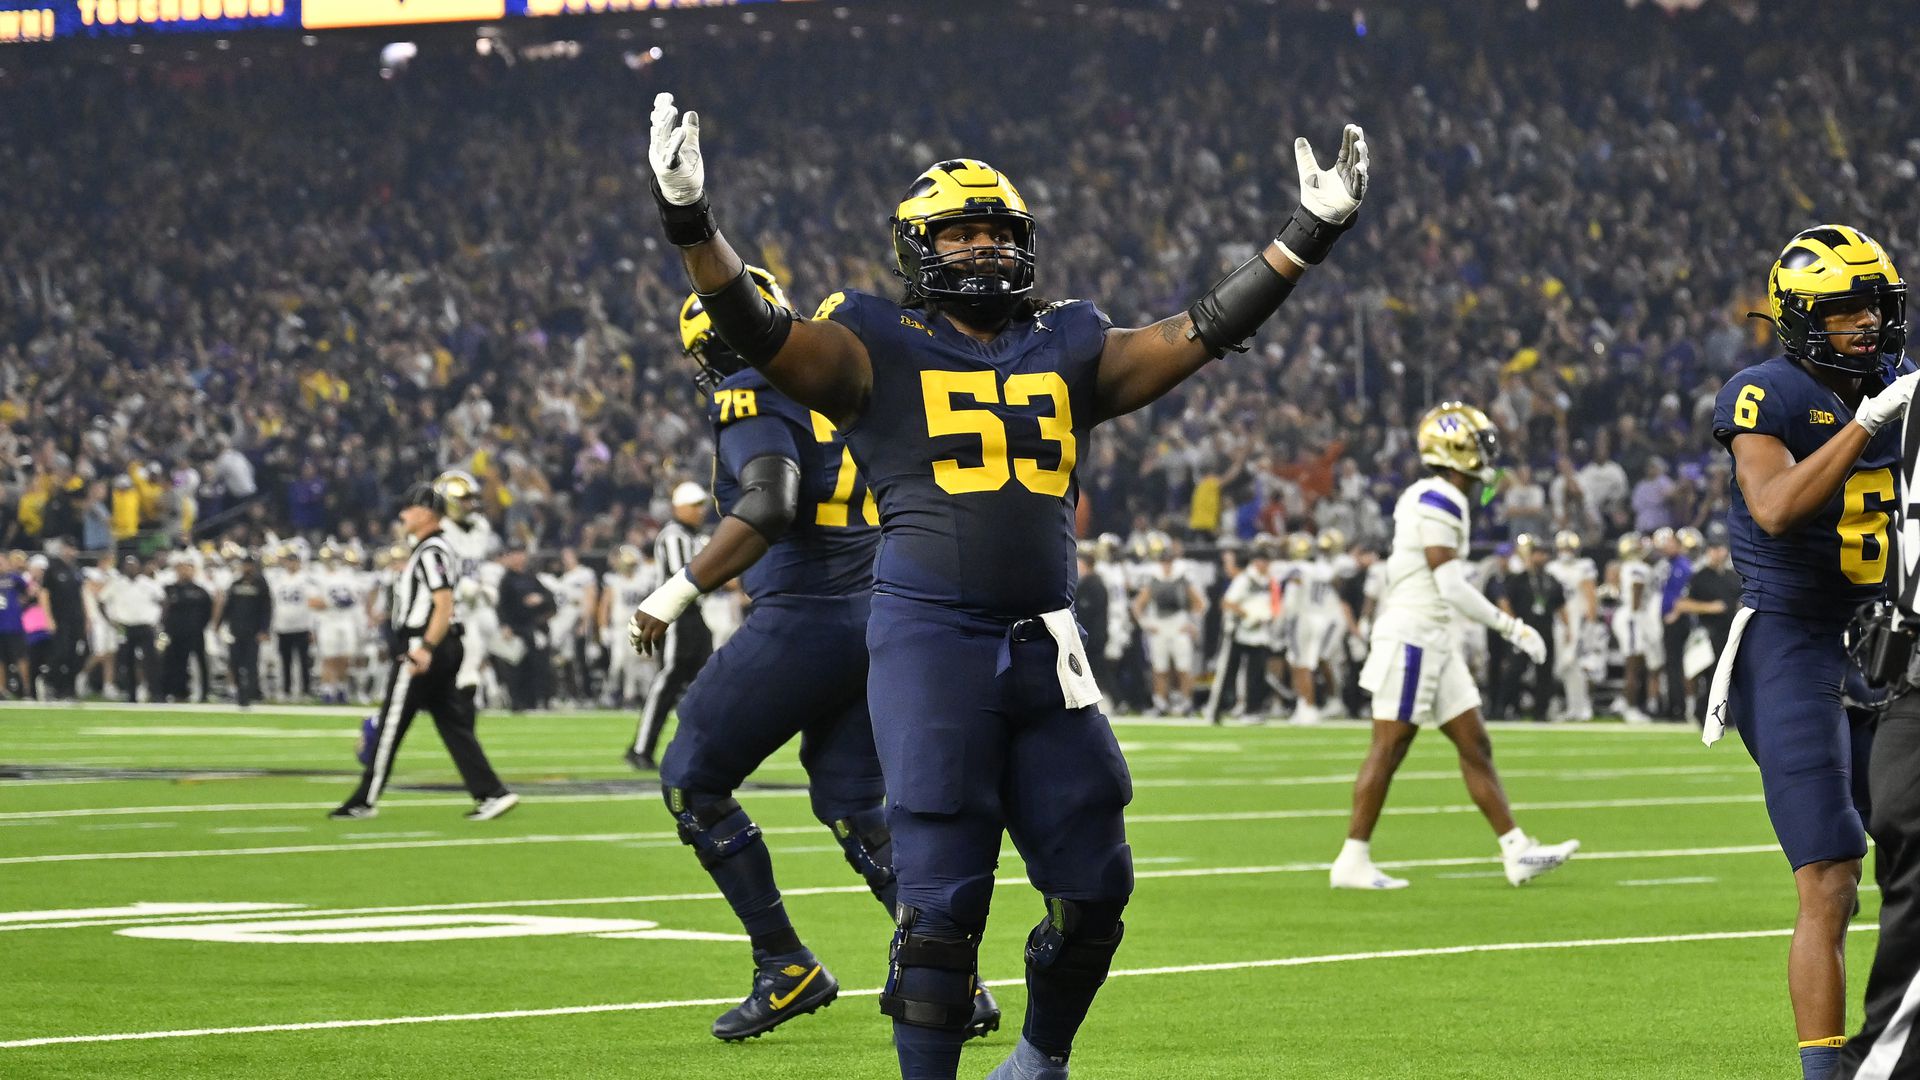 michigan ol trente jones signing with the green bay packers as udfa